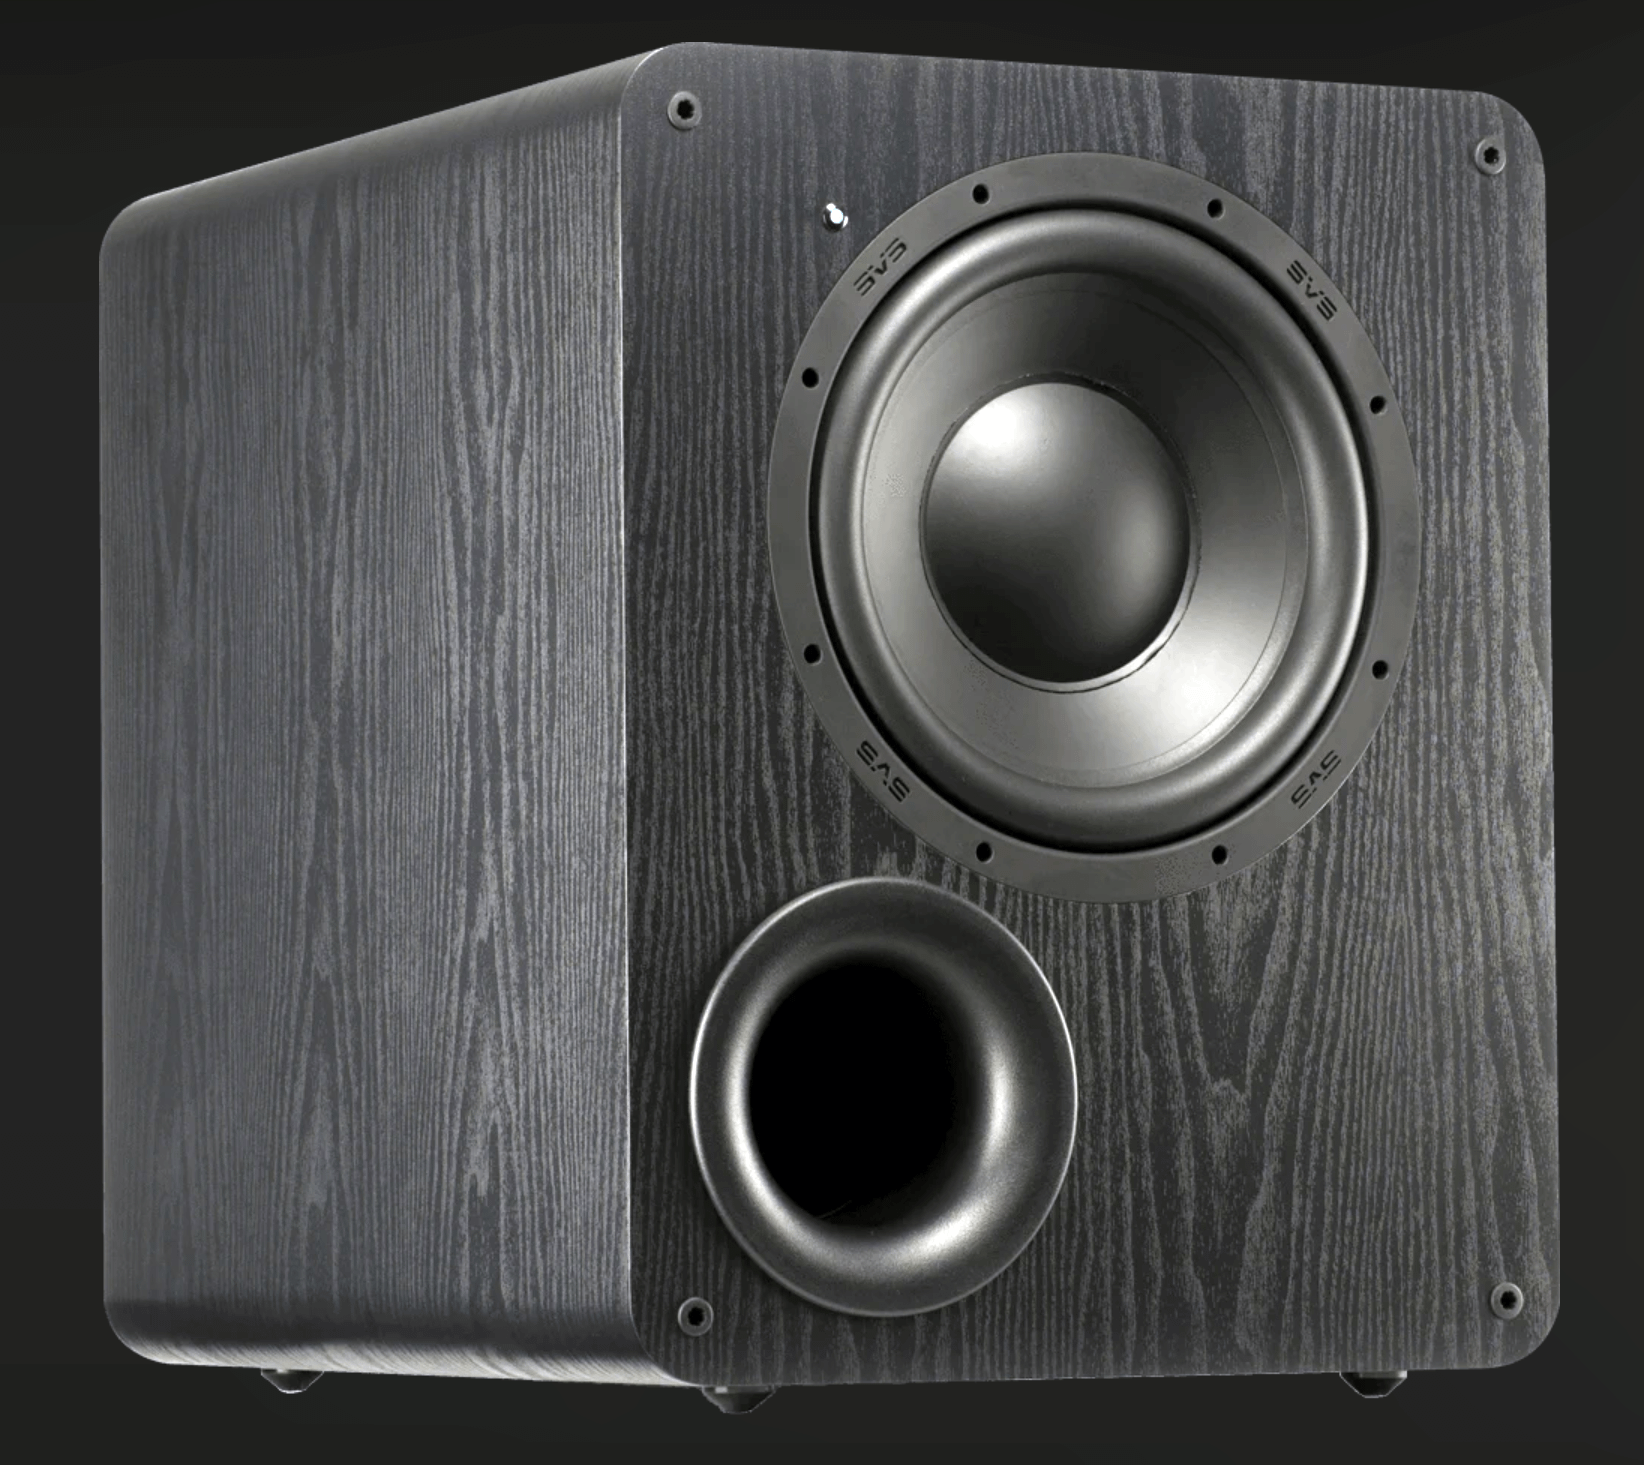 Big-time Black Friday savings on SVS Subwoofers are live now, get 'em while they last. 765b2e08 image